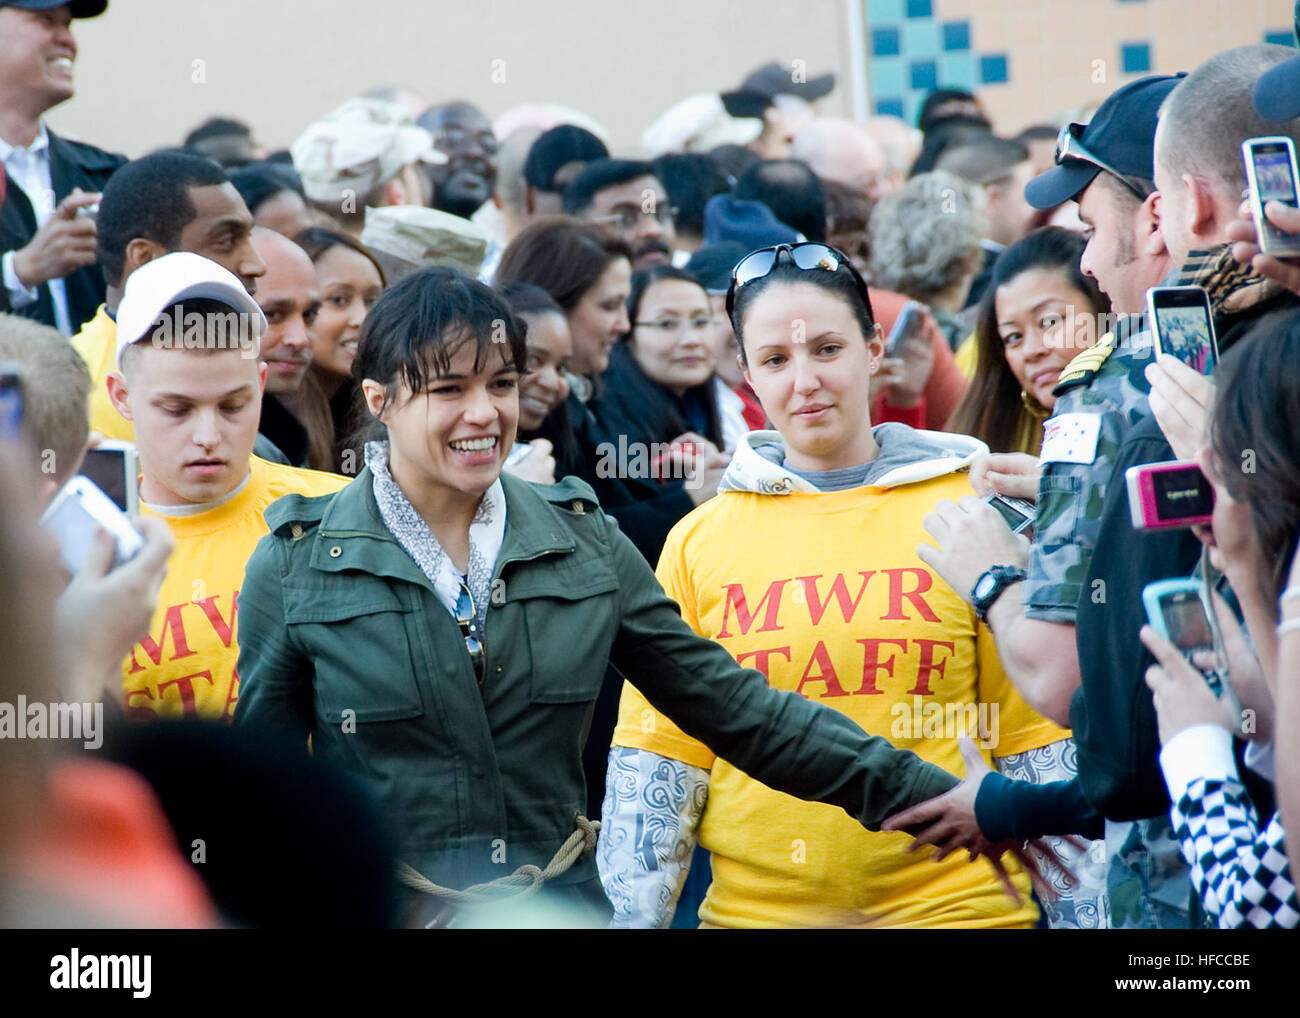 Michelle Rodriguez, an actress from the science fiction film Avatar, meets with U.S. Sailors and their families during a meet and greet event on Naval Support Activity Bahrain in Manama, Bahrain, Jan. 28, 2010. The stop, which is one of several planned in the U.S. 5th Fleet area of operations, includes Avatar stars Sigourney Weaver, Stephen Lang and Oscar-winning director James Cameron. (DoD photo by Mass Communication Specialist 2nd Class Aramis X. Ramirez, U.S. Navy/Released) Michelle Rodriguez at NSA Bahrain 2010-01-28 Stock Photo